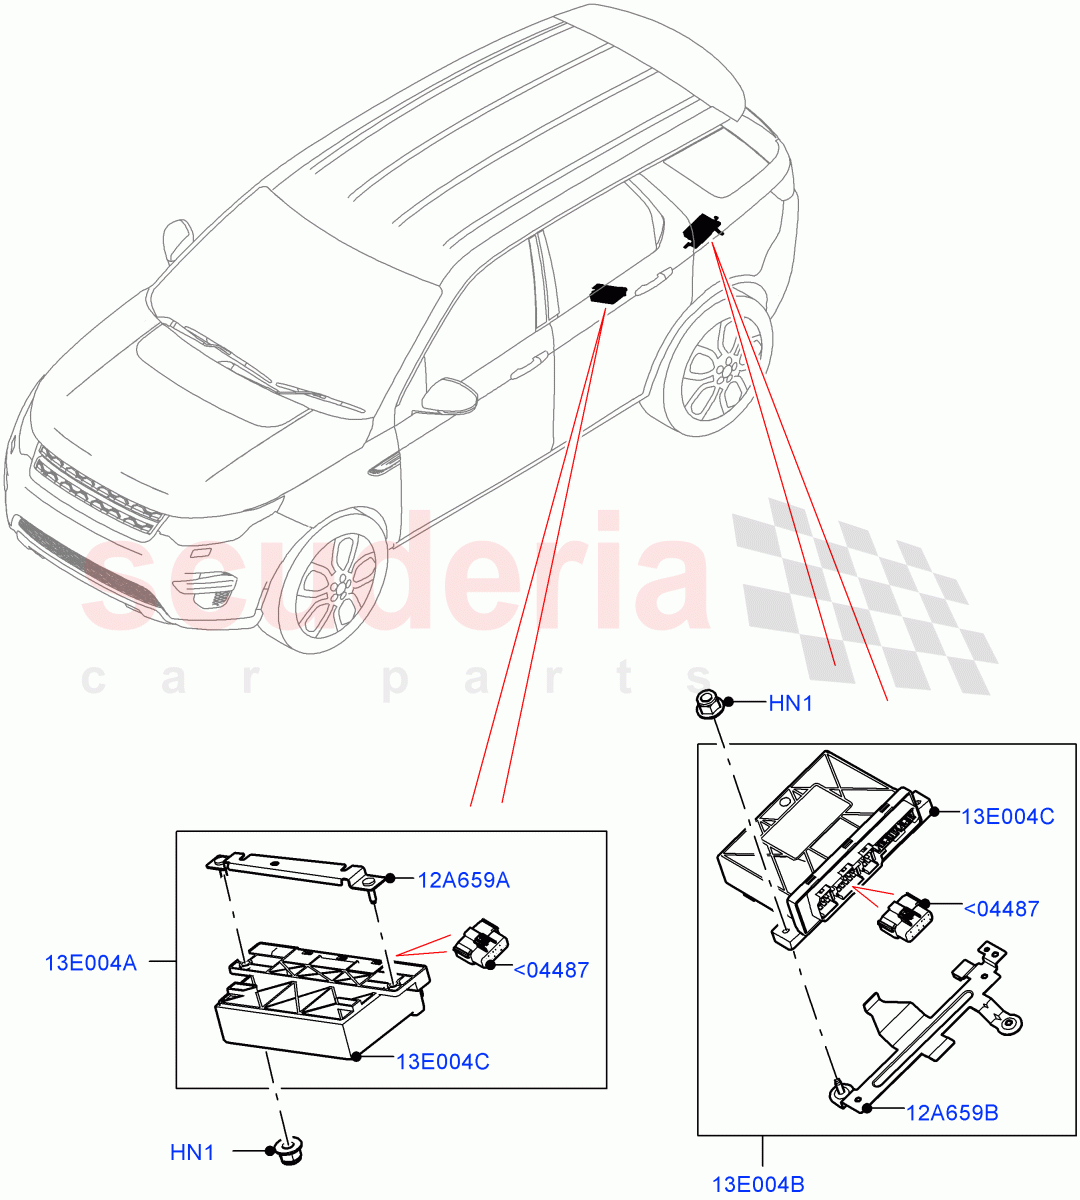 Vehicle Modules And Sensors(Towbar)(Halewood (UK),Tow Hitch Elec Deployable Swan Neck,Tow Hitch Receiver NAS,Tow Hitch Man Detachable Swan Neck,Tow Hitch Receiver 12 Pin Elec) of Land Rover Land Rover Discovery Sport (2015+) [2.0 Turbo Petrol AJ200P]